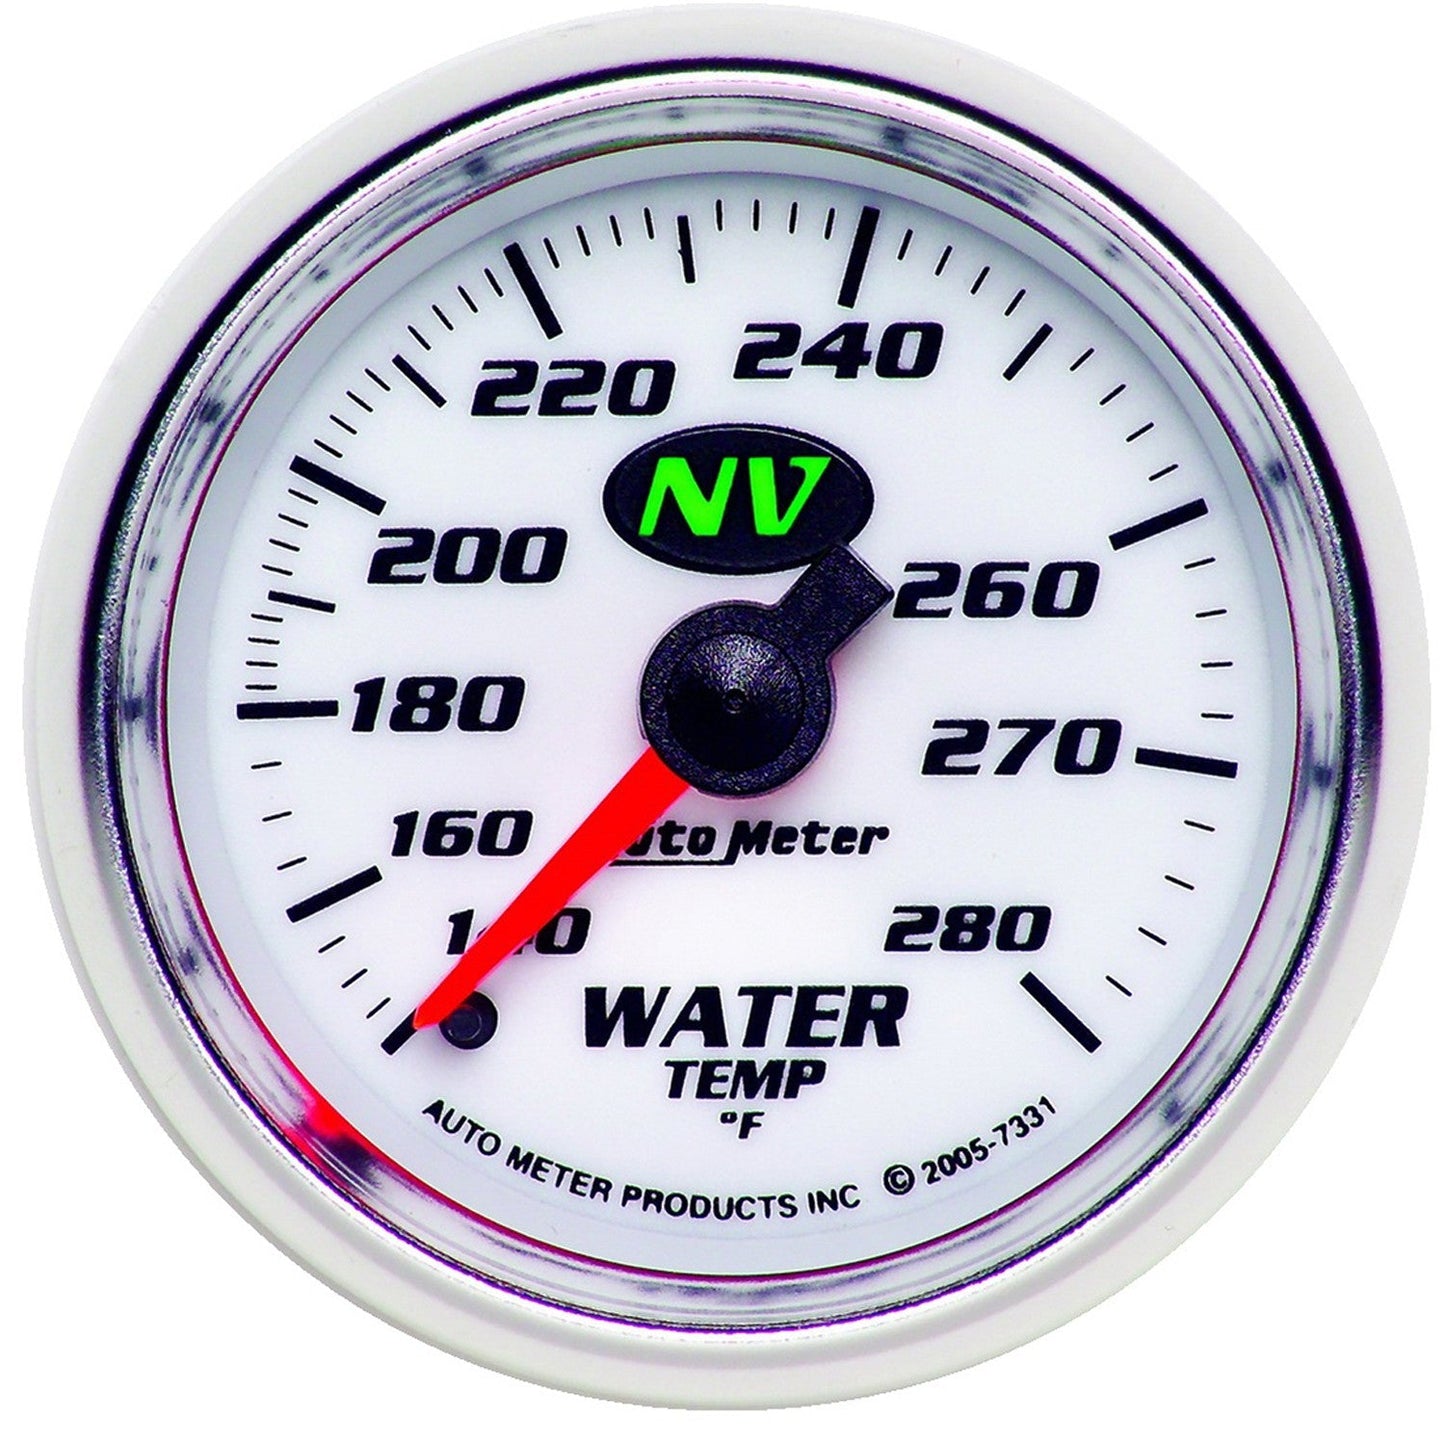 AutoMeter - 2-1/16" WATER TEMPERATURE, 140-280 °F, 6 FT., MECHANICAL, NV (7331)